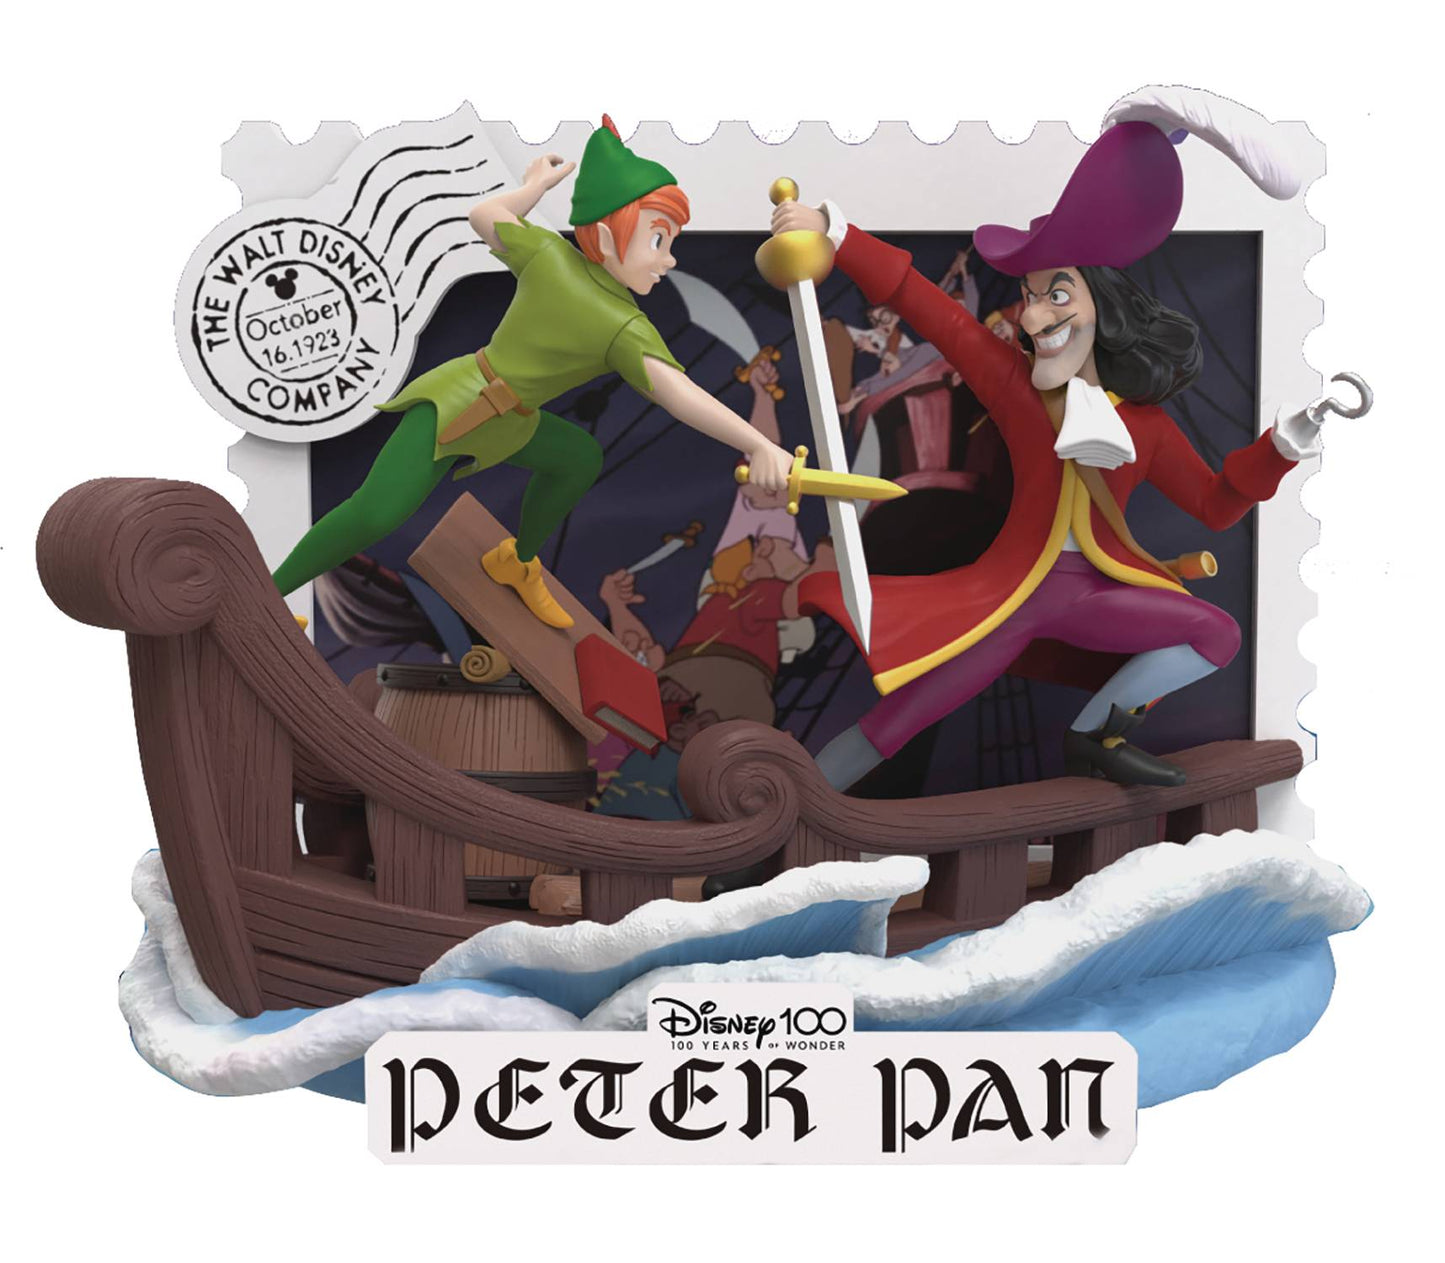 DISNEY 100 YEARS DS-137 PETER PAN D-STAGE 6IN STATUE